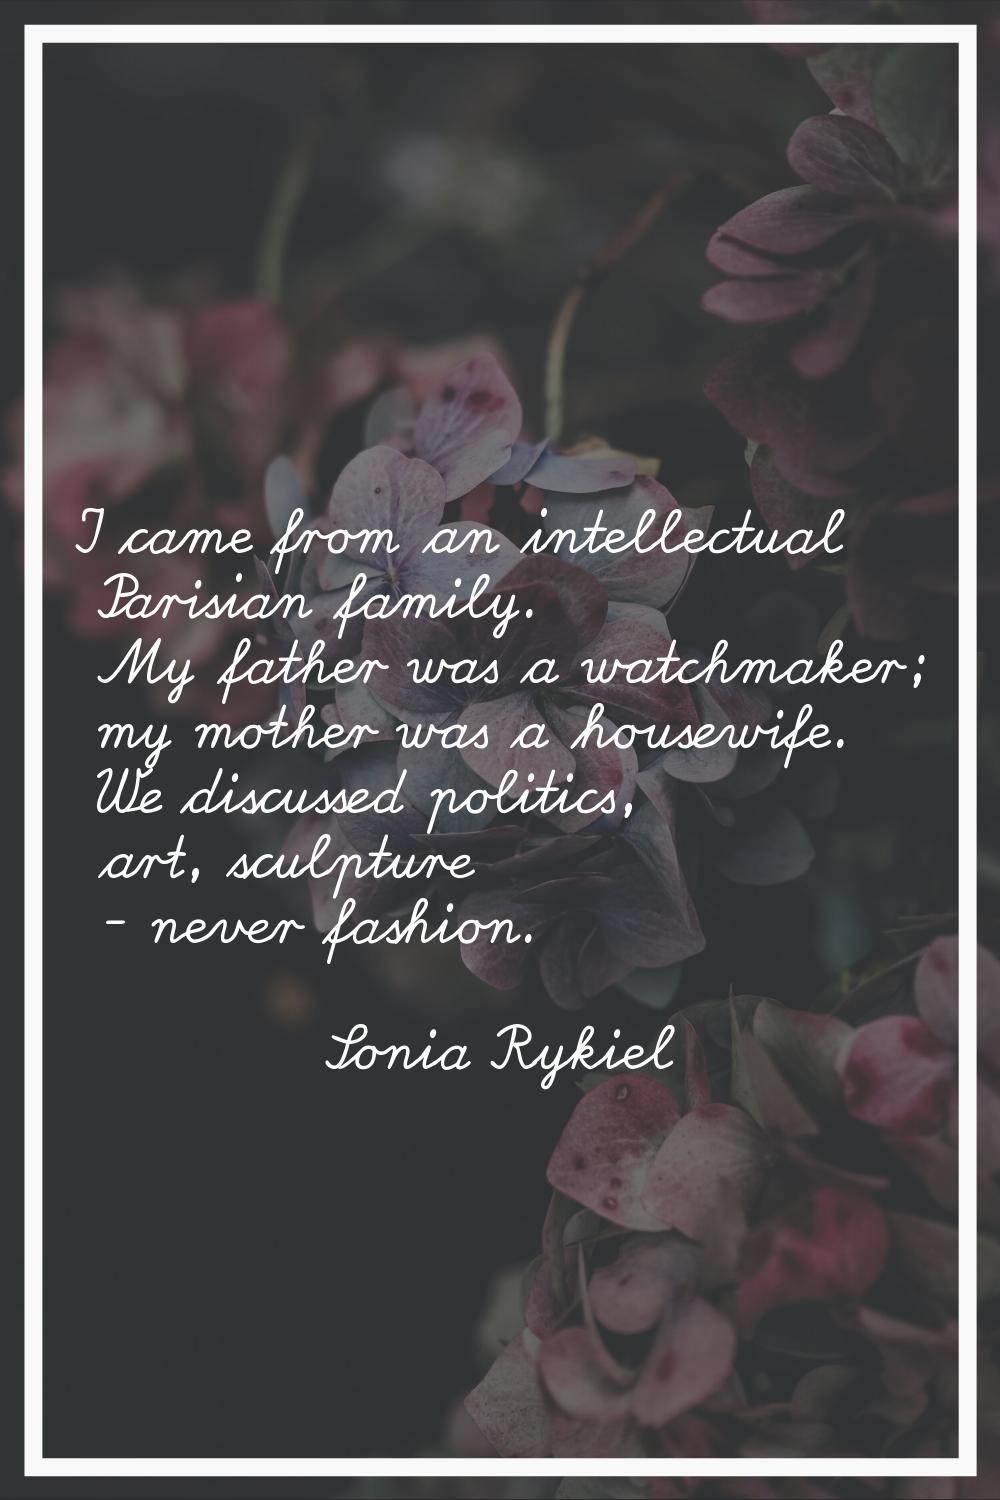 I came from an intellectual Parisian family. My father was a watchmaker; my mother was a housewife.